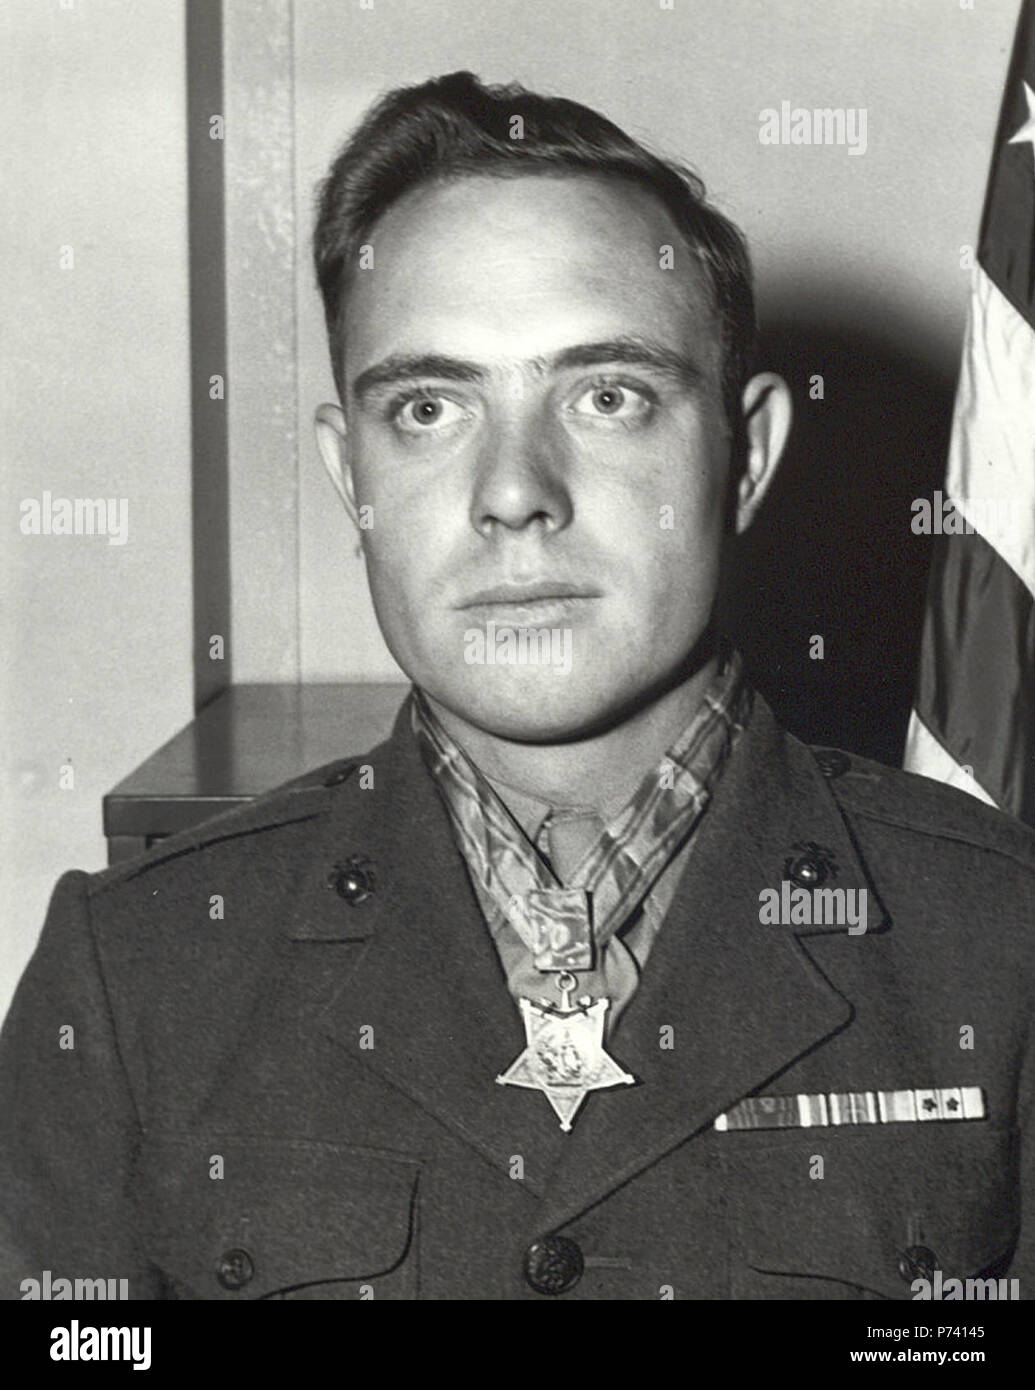 U.S. Marine Corps Cpl., Hershel 'Woody' Williams, received the Medal of Honor for his gallantry in action during the Battle of Iwo Jima, Feb. 23, 1945. Williams fought for four hours through small-arms fire while returning charges at the enemy with his flamethrower. Stock Photo